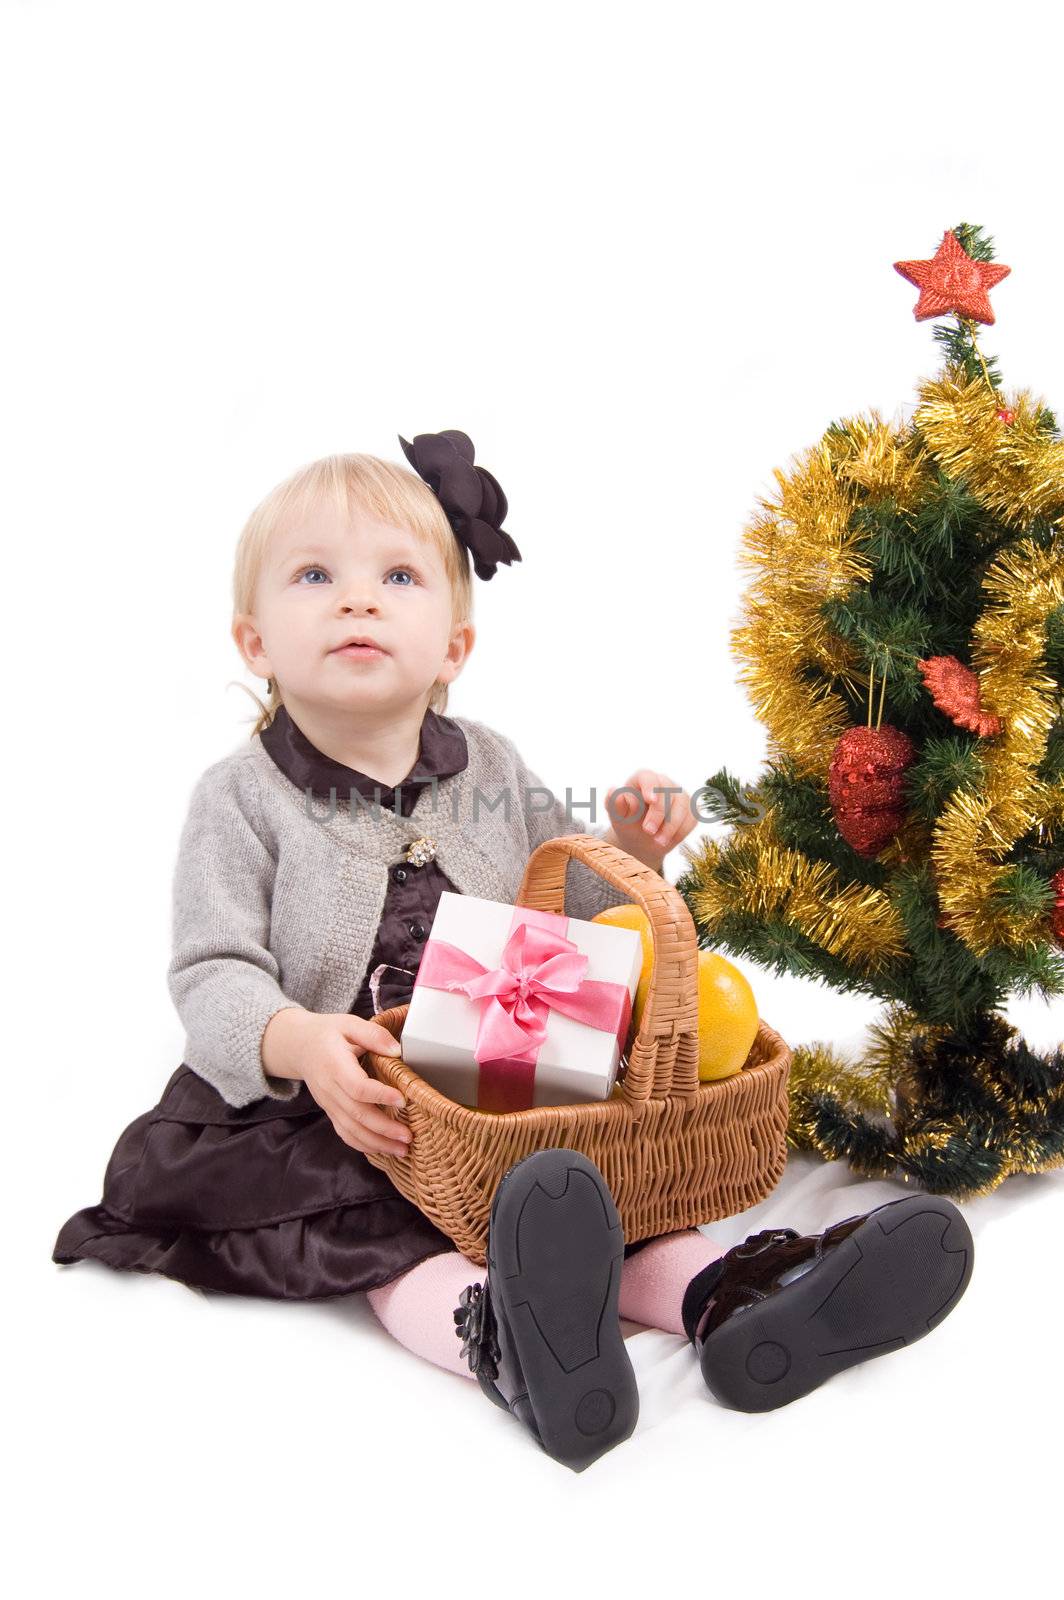 Little girl with Christmas tree and gifts by Angel_a